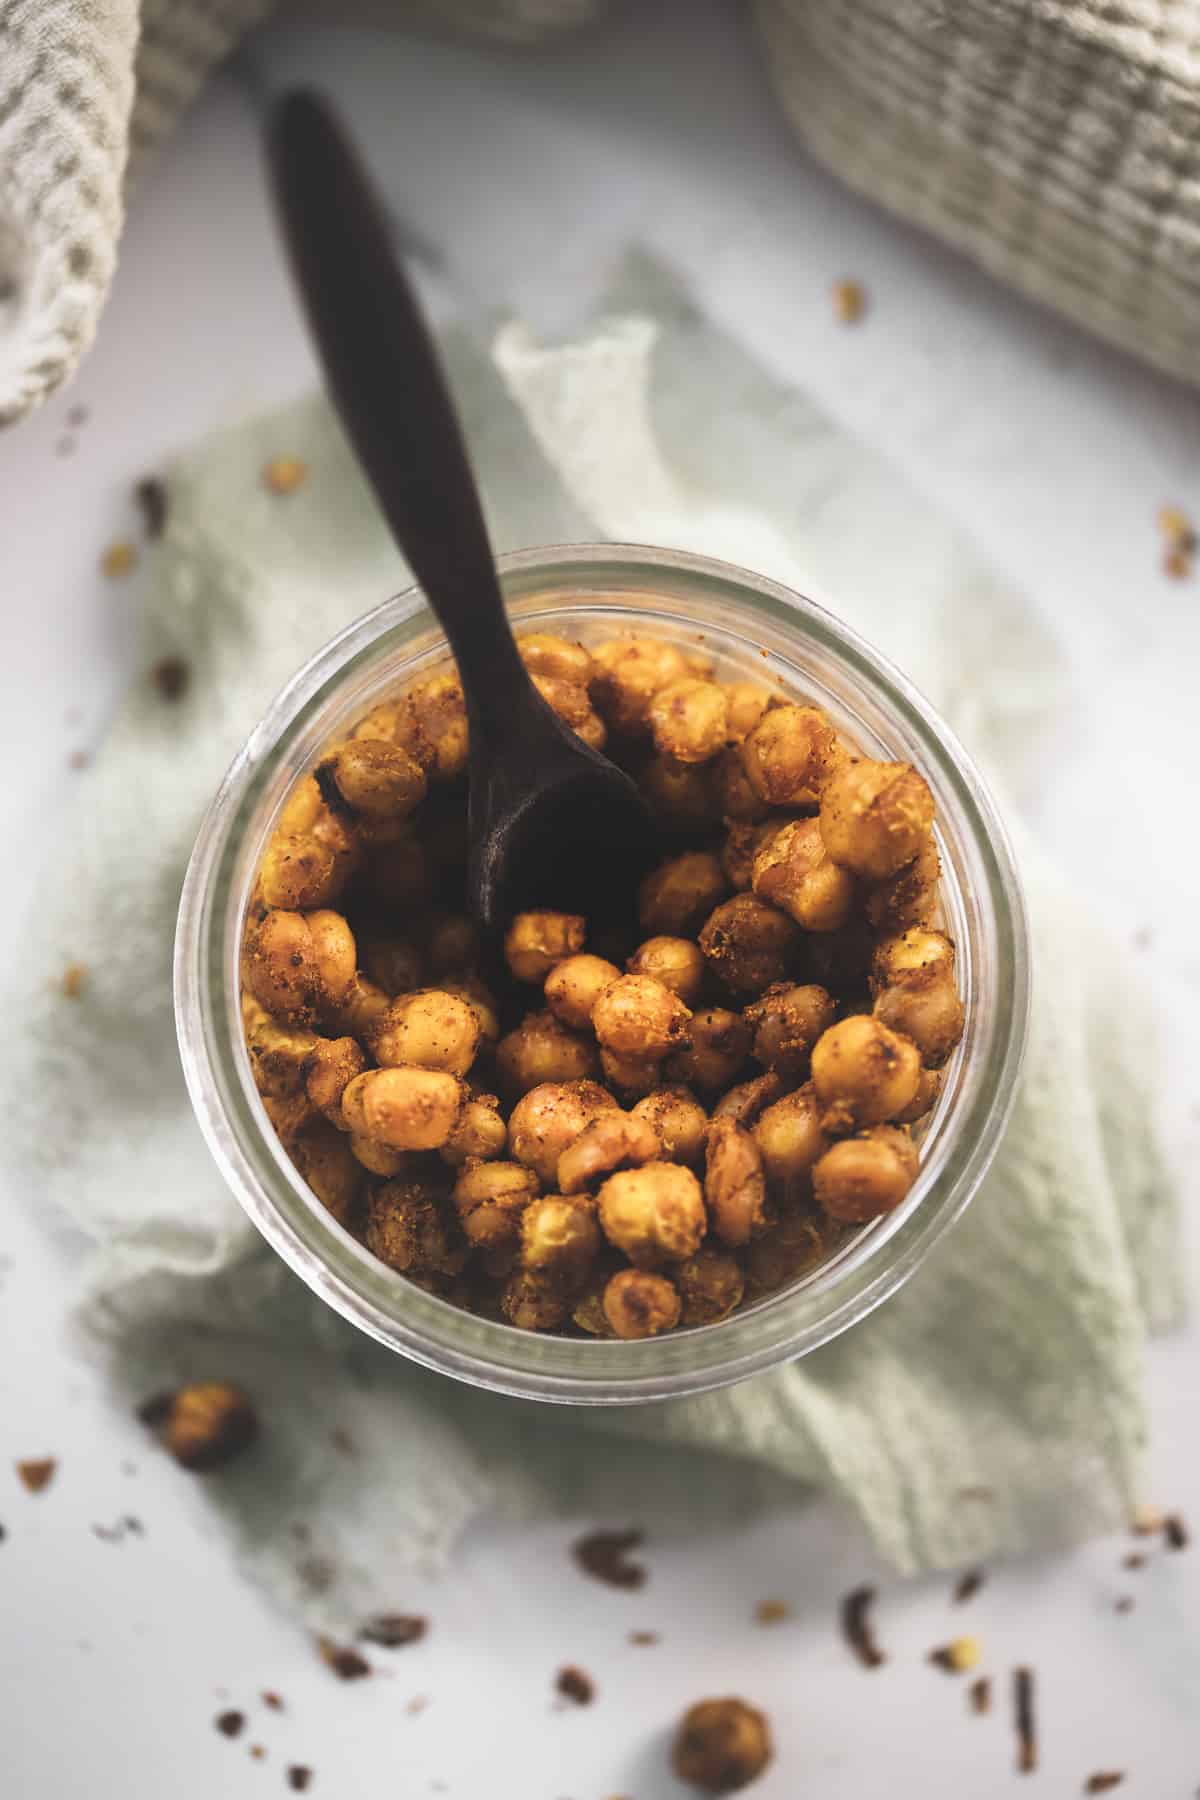 A jar of seasoned, roasted chickpeas in a jar with a wooden serving spoon.